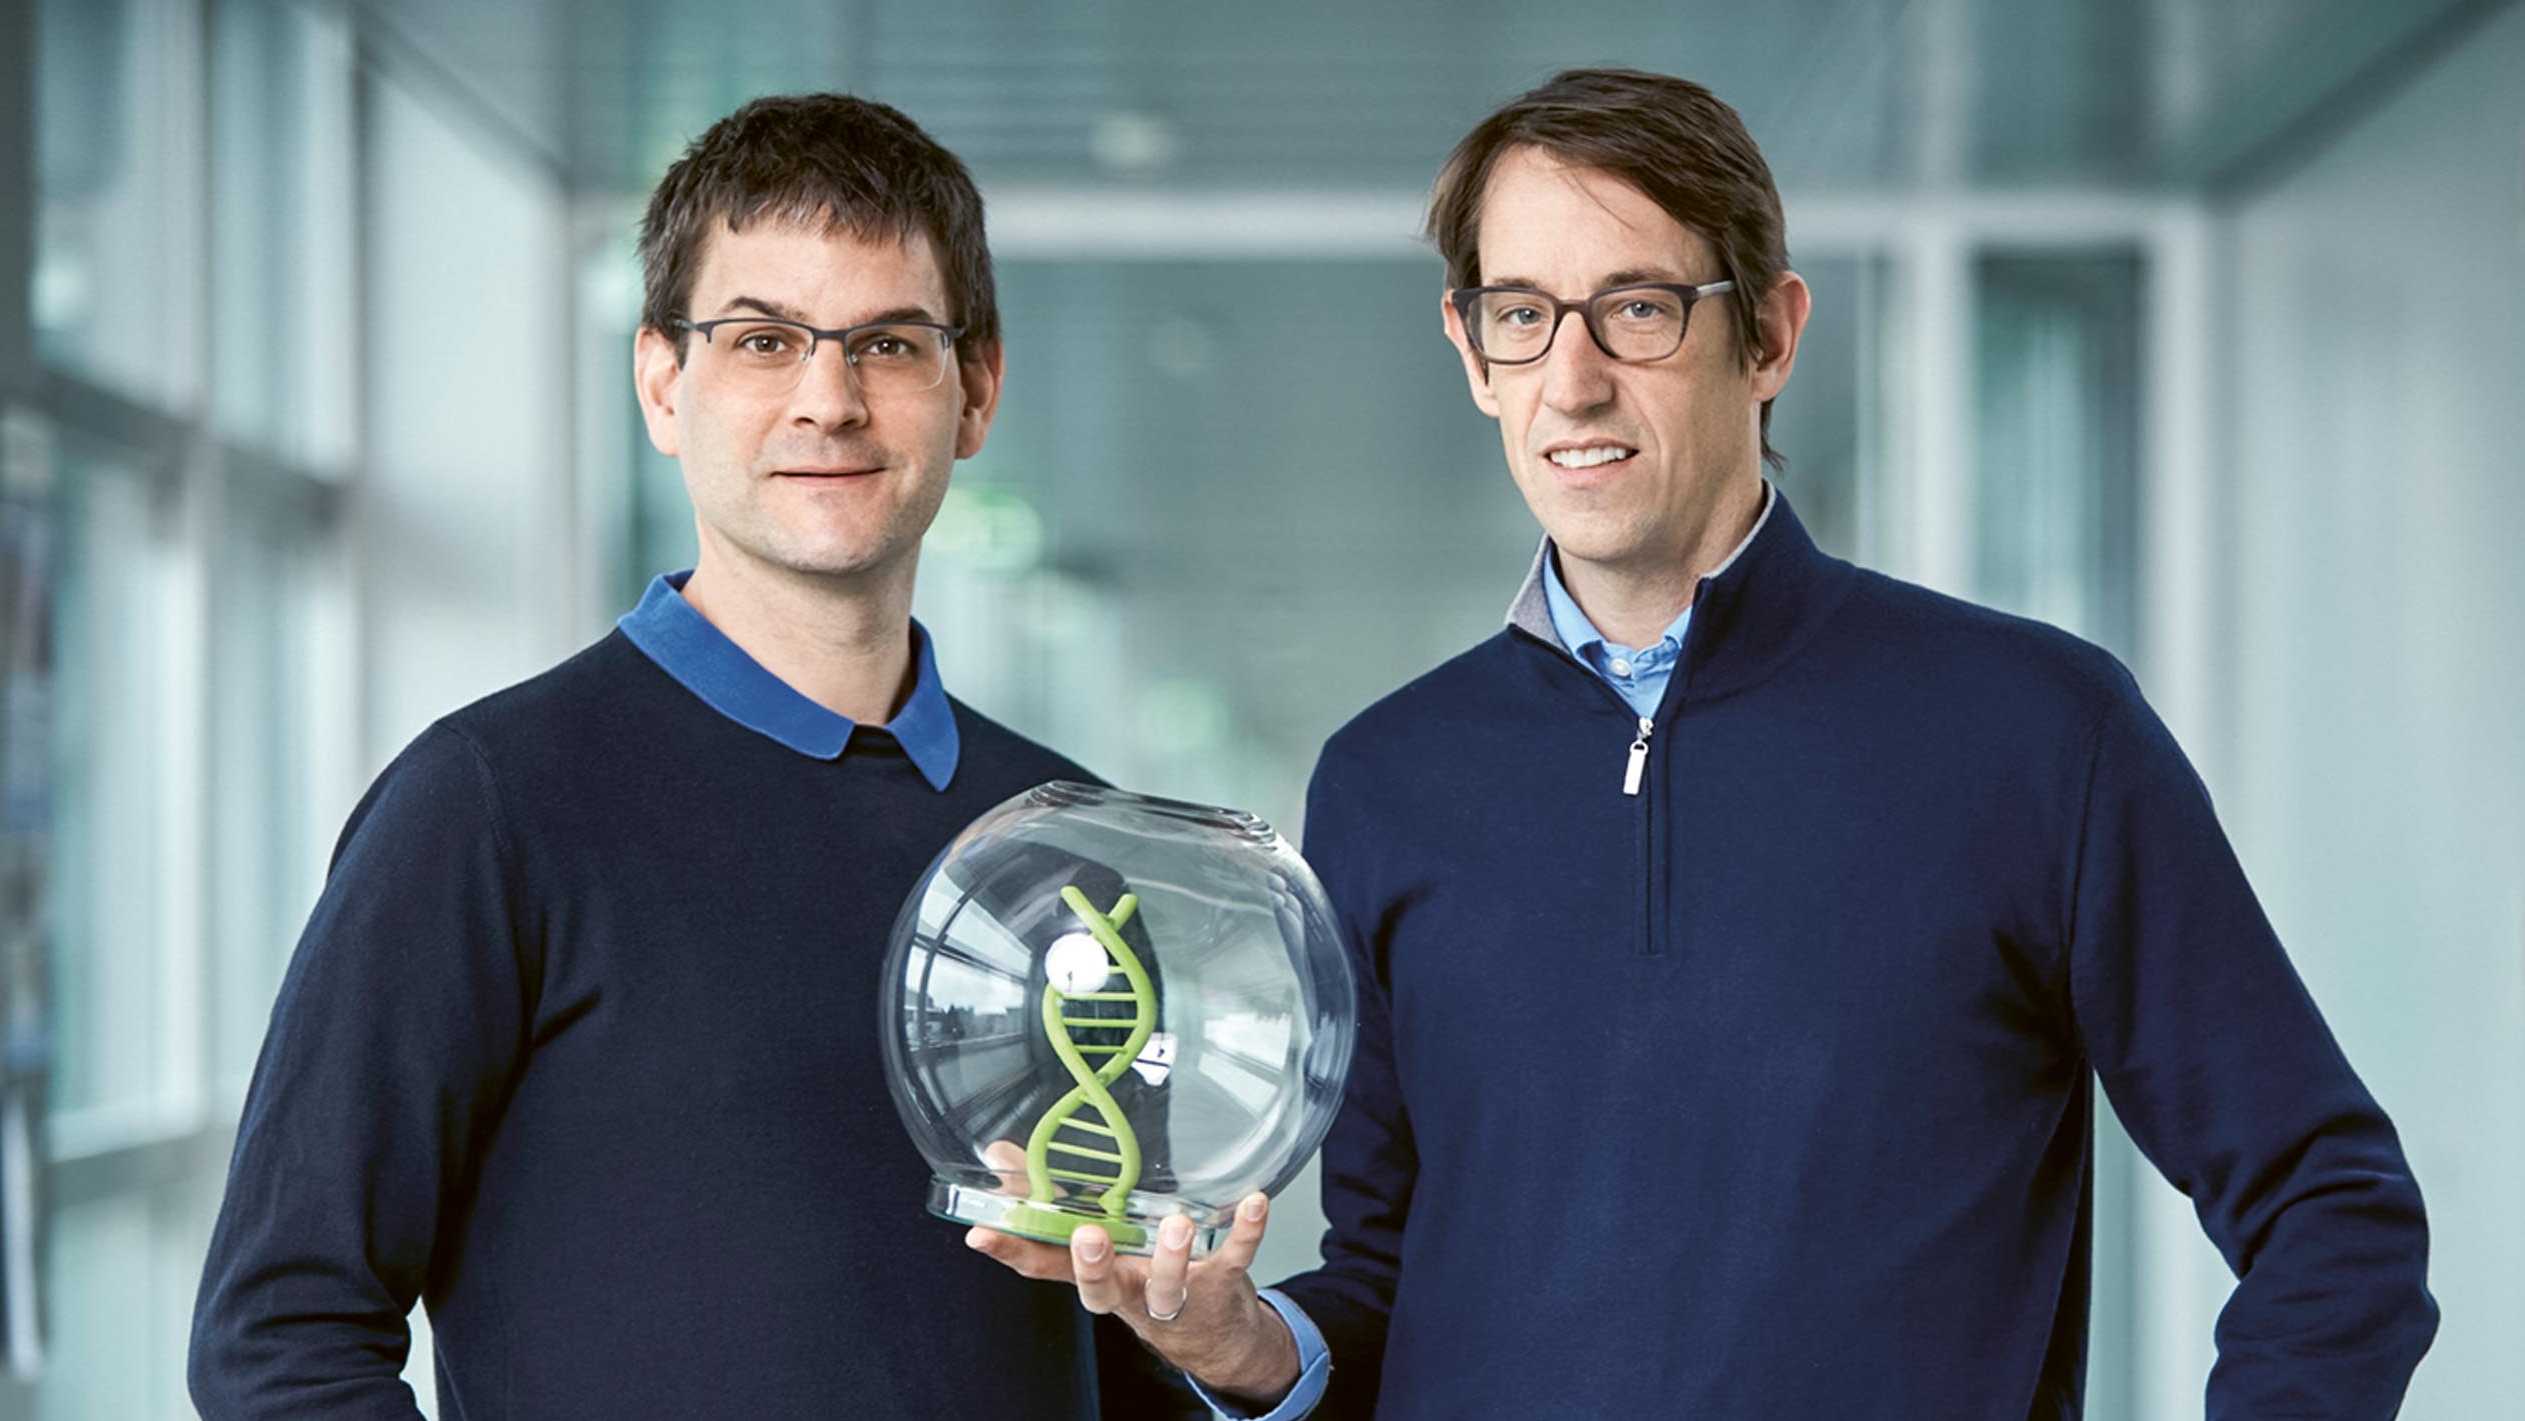 In 2021 Wendelin Stark and Robert Grass received the European Inventor Award 2021 for their method of data storage which involves encoding digital data on DNA and encapsulating them within protective glass particles 